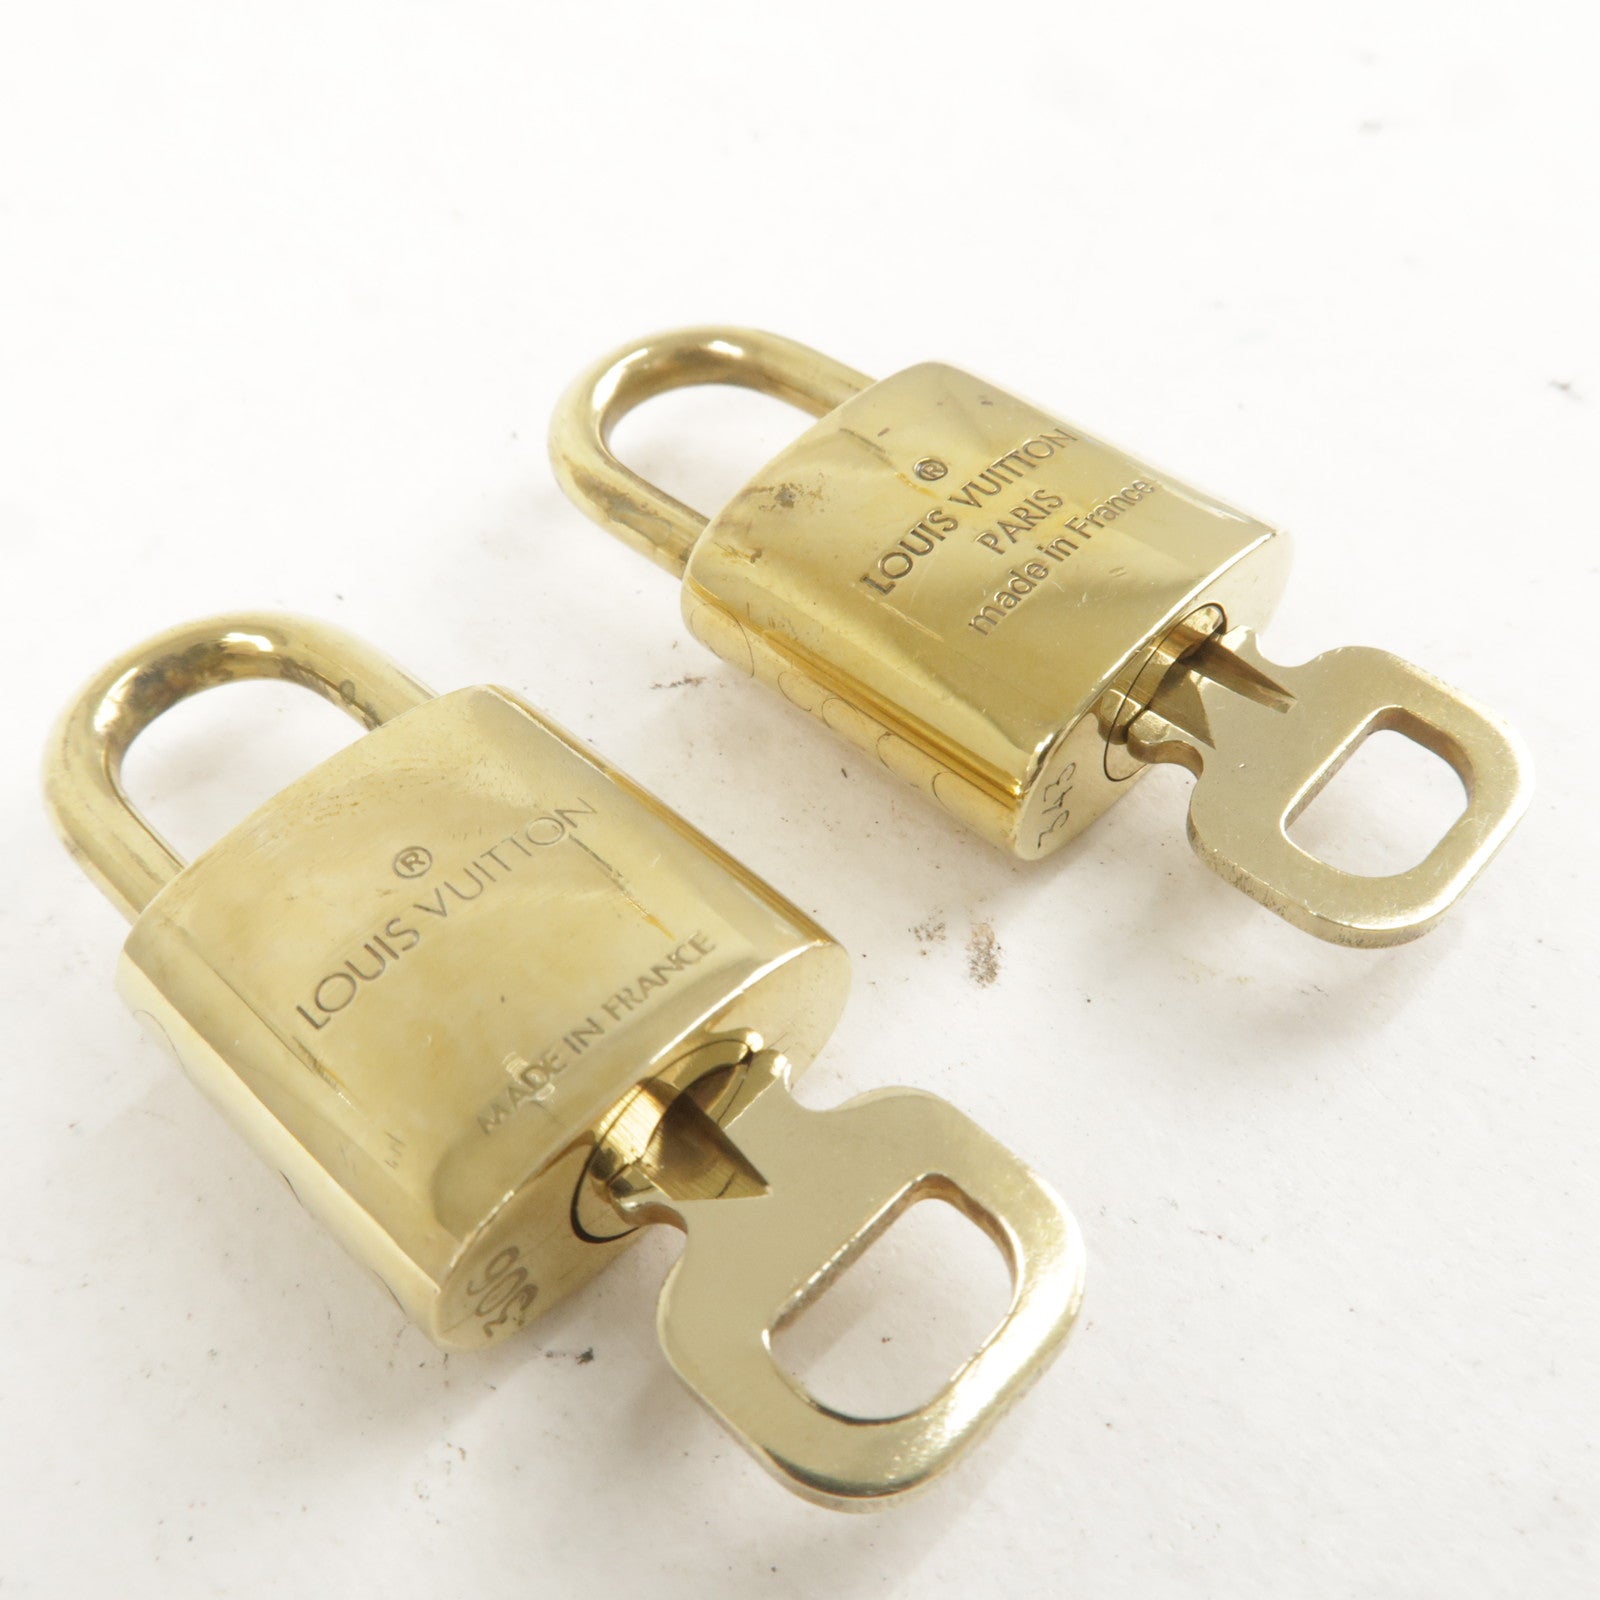 Authentic LOUIS VUITTON Brass Padlock with Matching Key (LV Lock